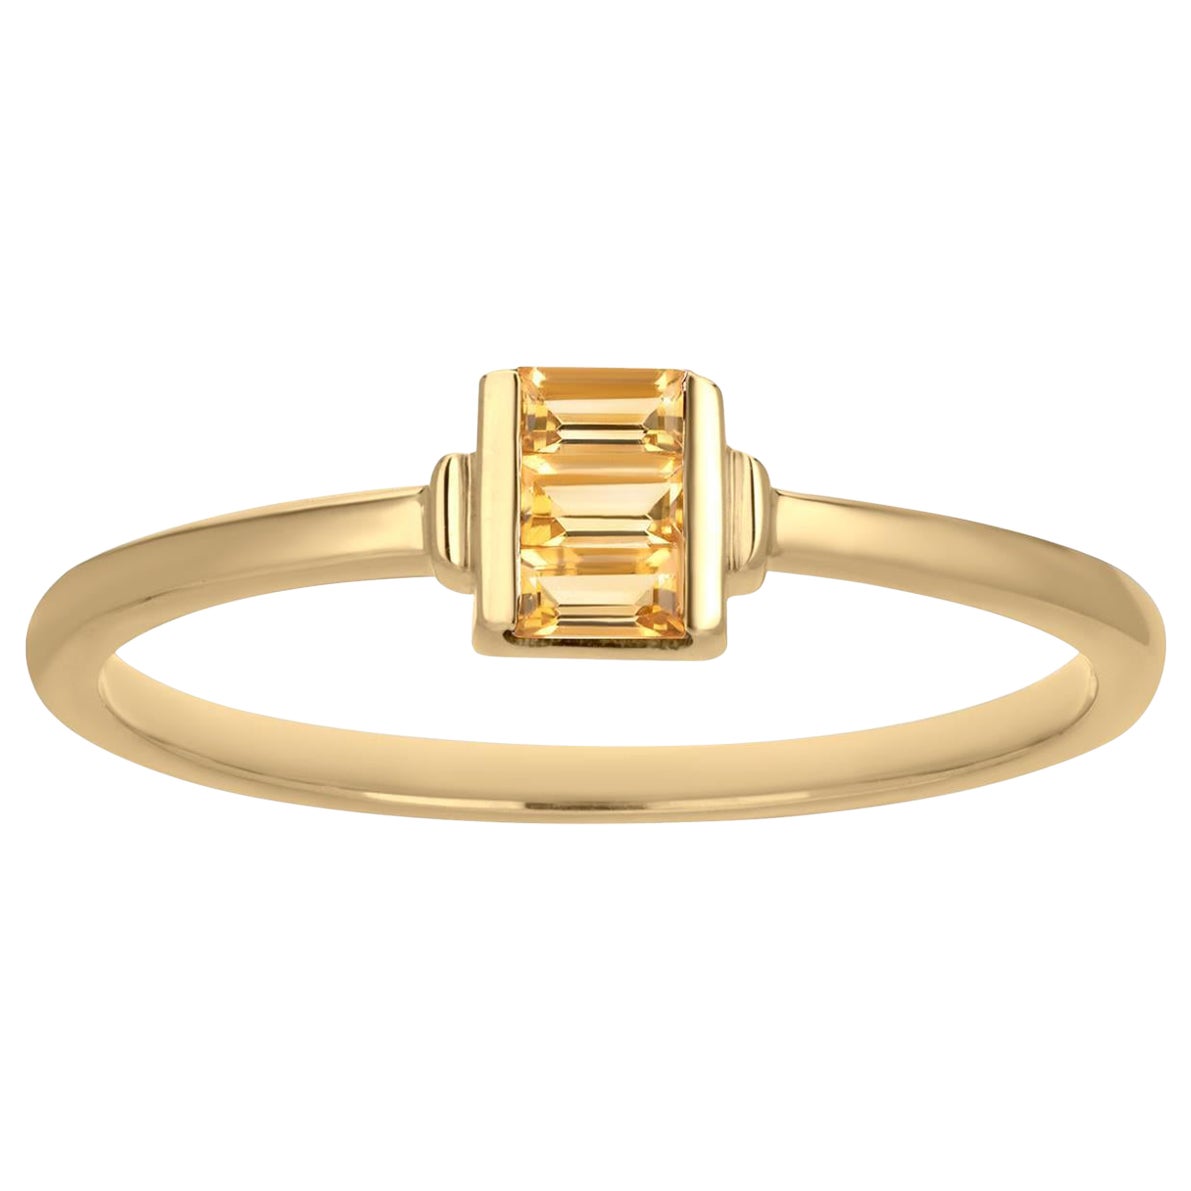 Gemistry 0.14 Cttw. Baguette-Shaped Citrine Band Ring in 14k Yellow Gold For Sale